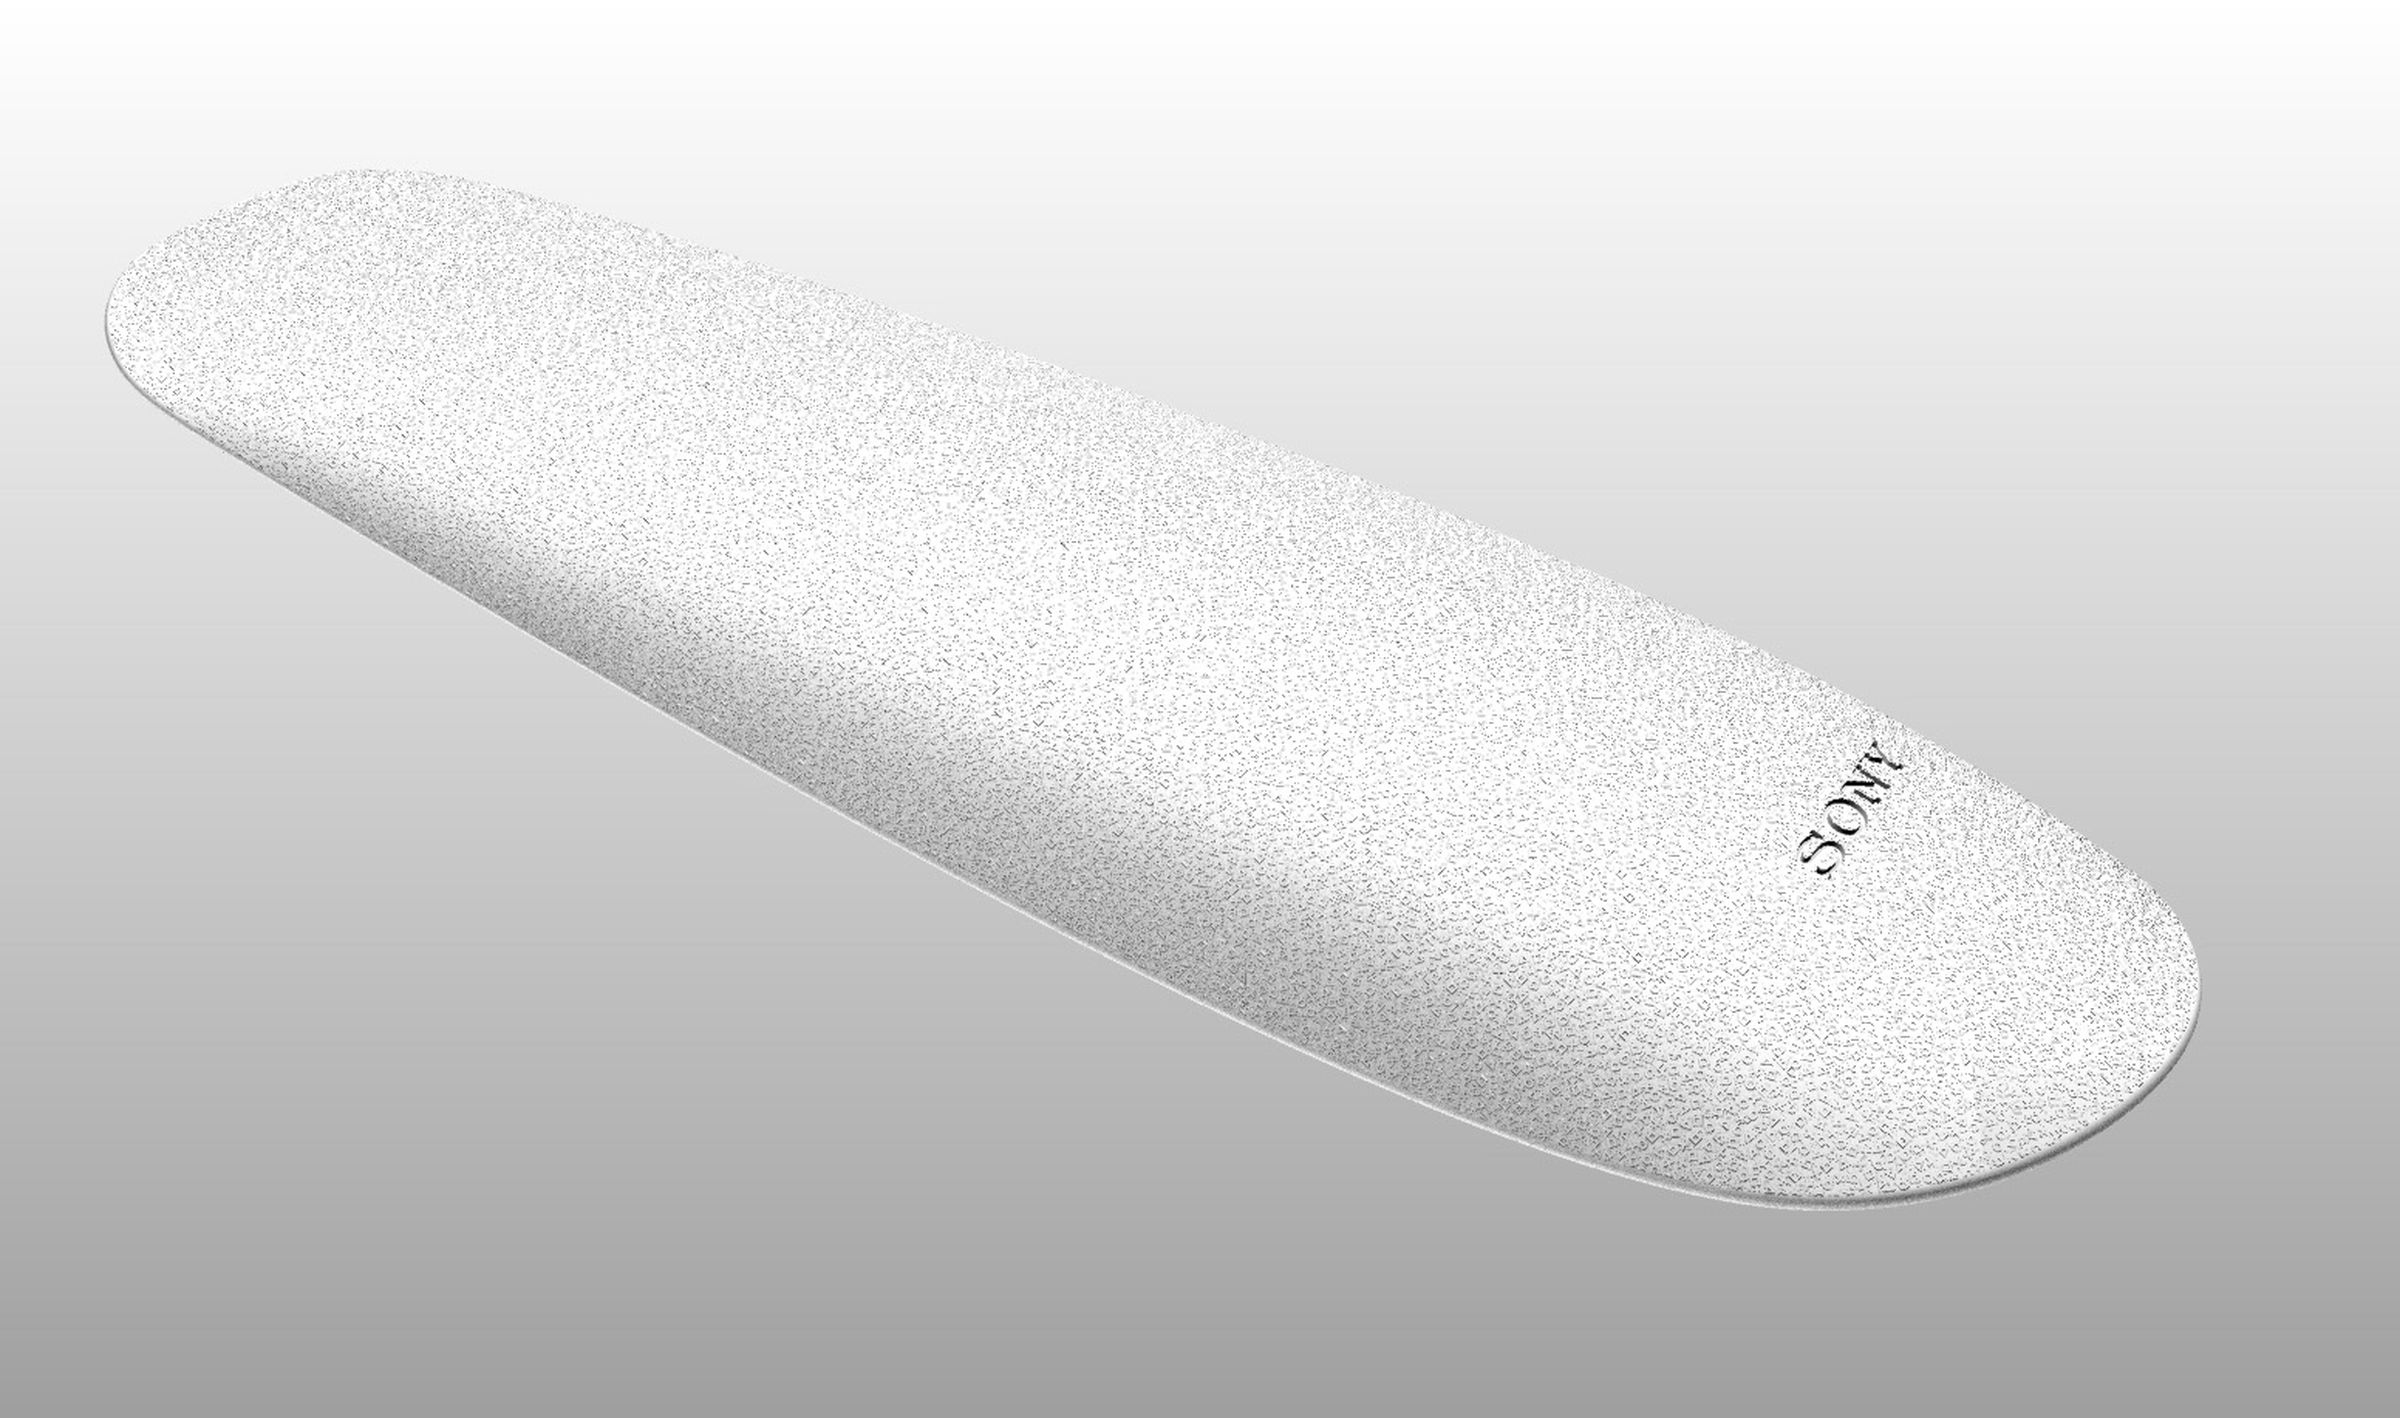 A final CAD render check for the PS5 Media Remote’s grip.